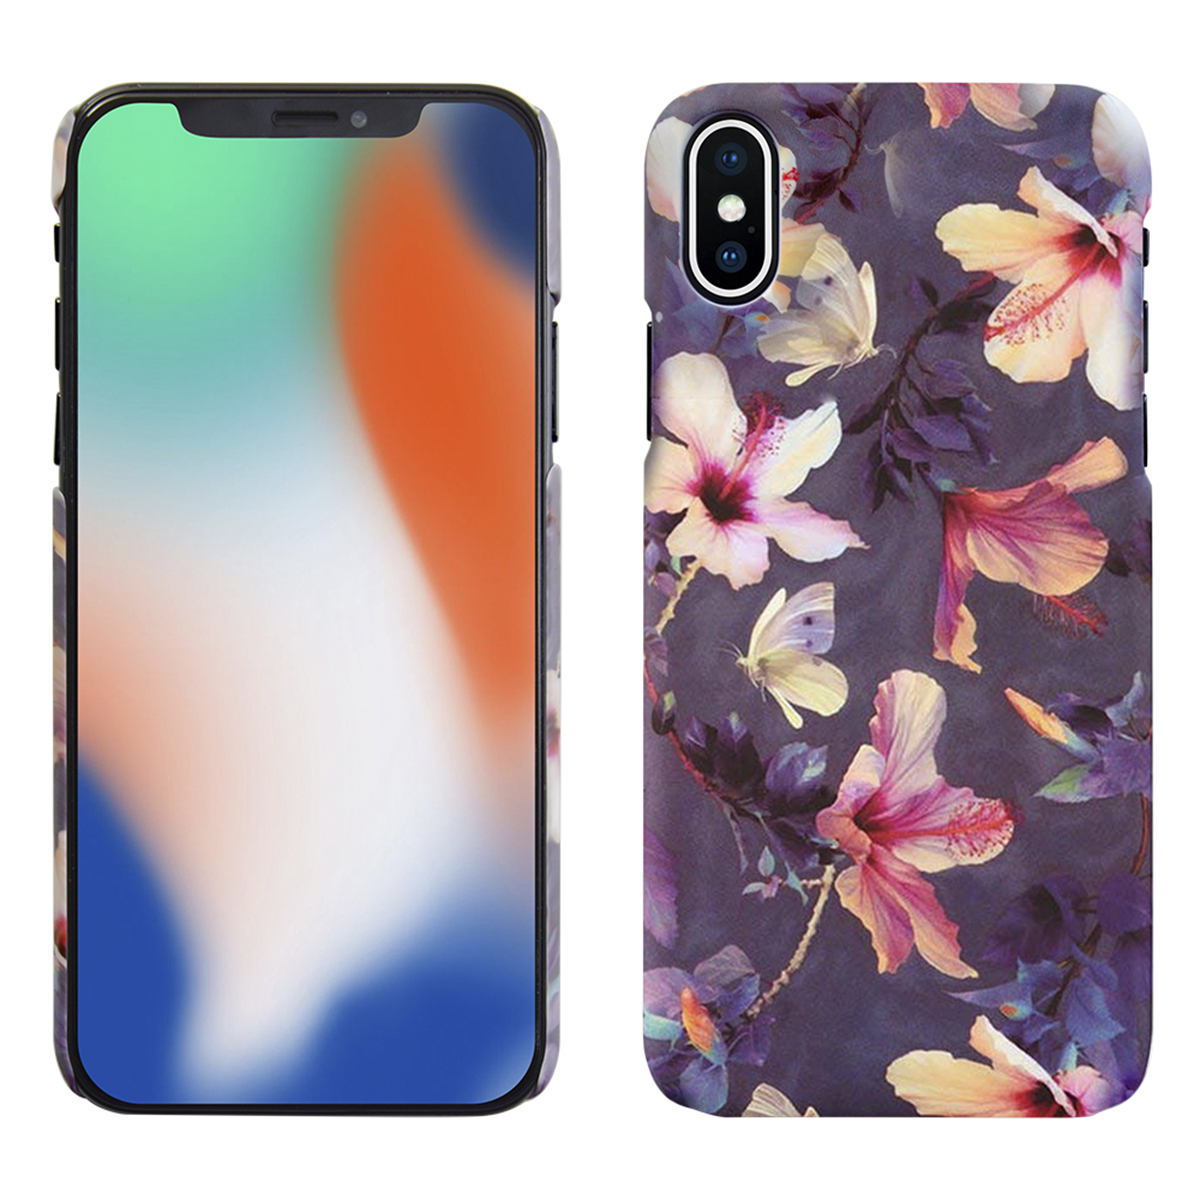 Indexbild 16 - For Apple iPhone XR Xs Max X 8 7 Plus 6 5 Se Case Cover Shockproof Slim Women